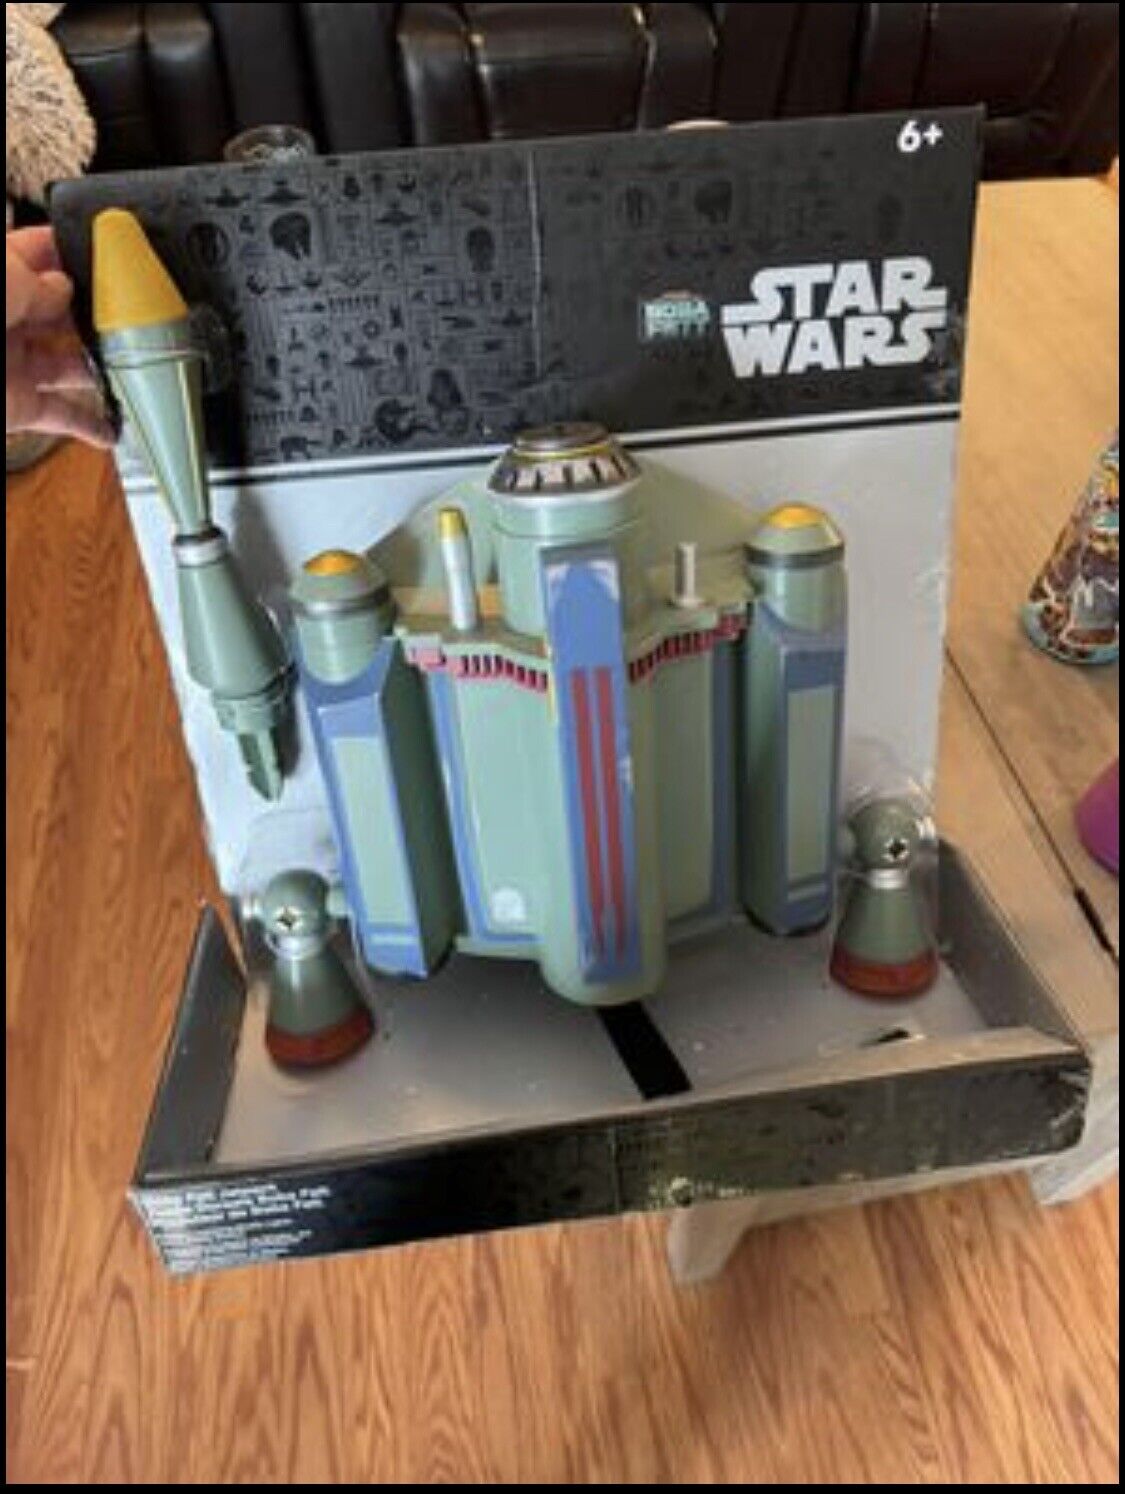 STAR WARS - BOBA FETT JETPACK - OFFICIAL DISNEY STORE REPLICA TOY - ELECTRONIC